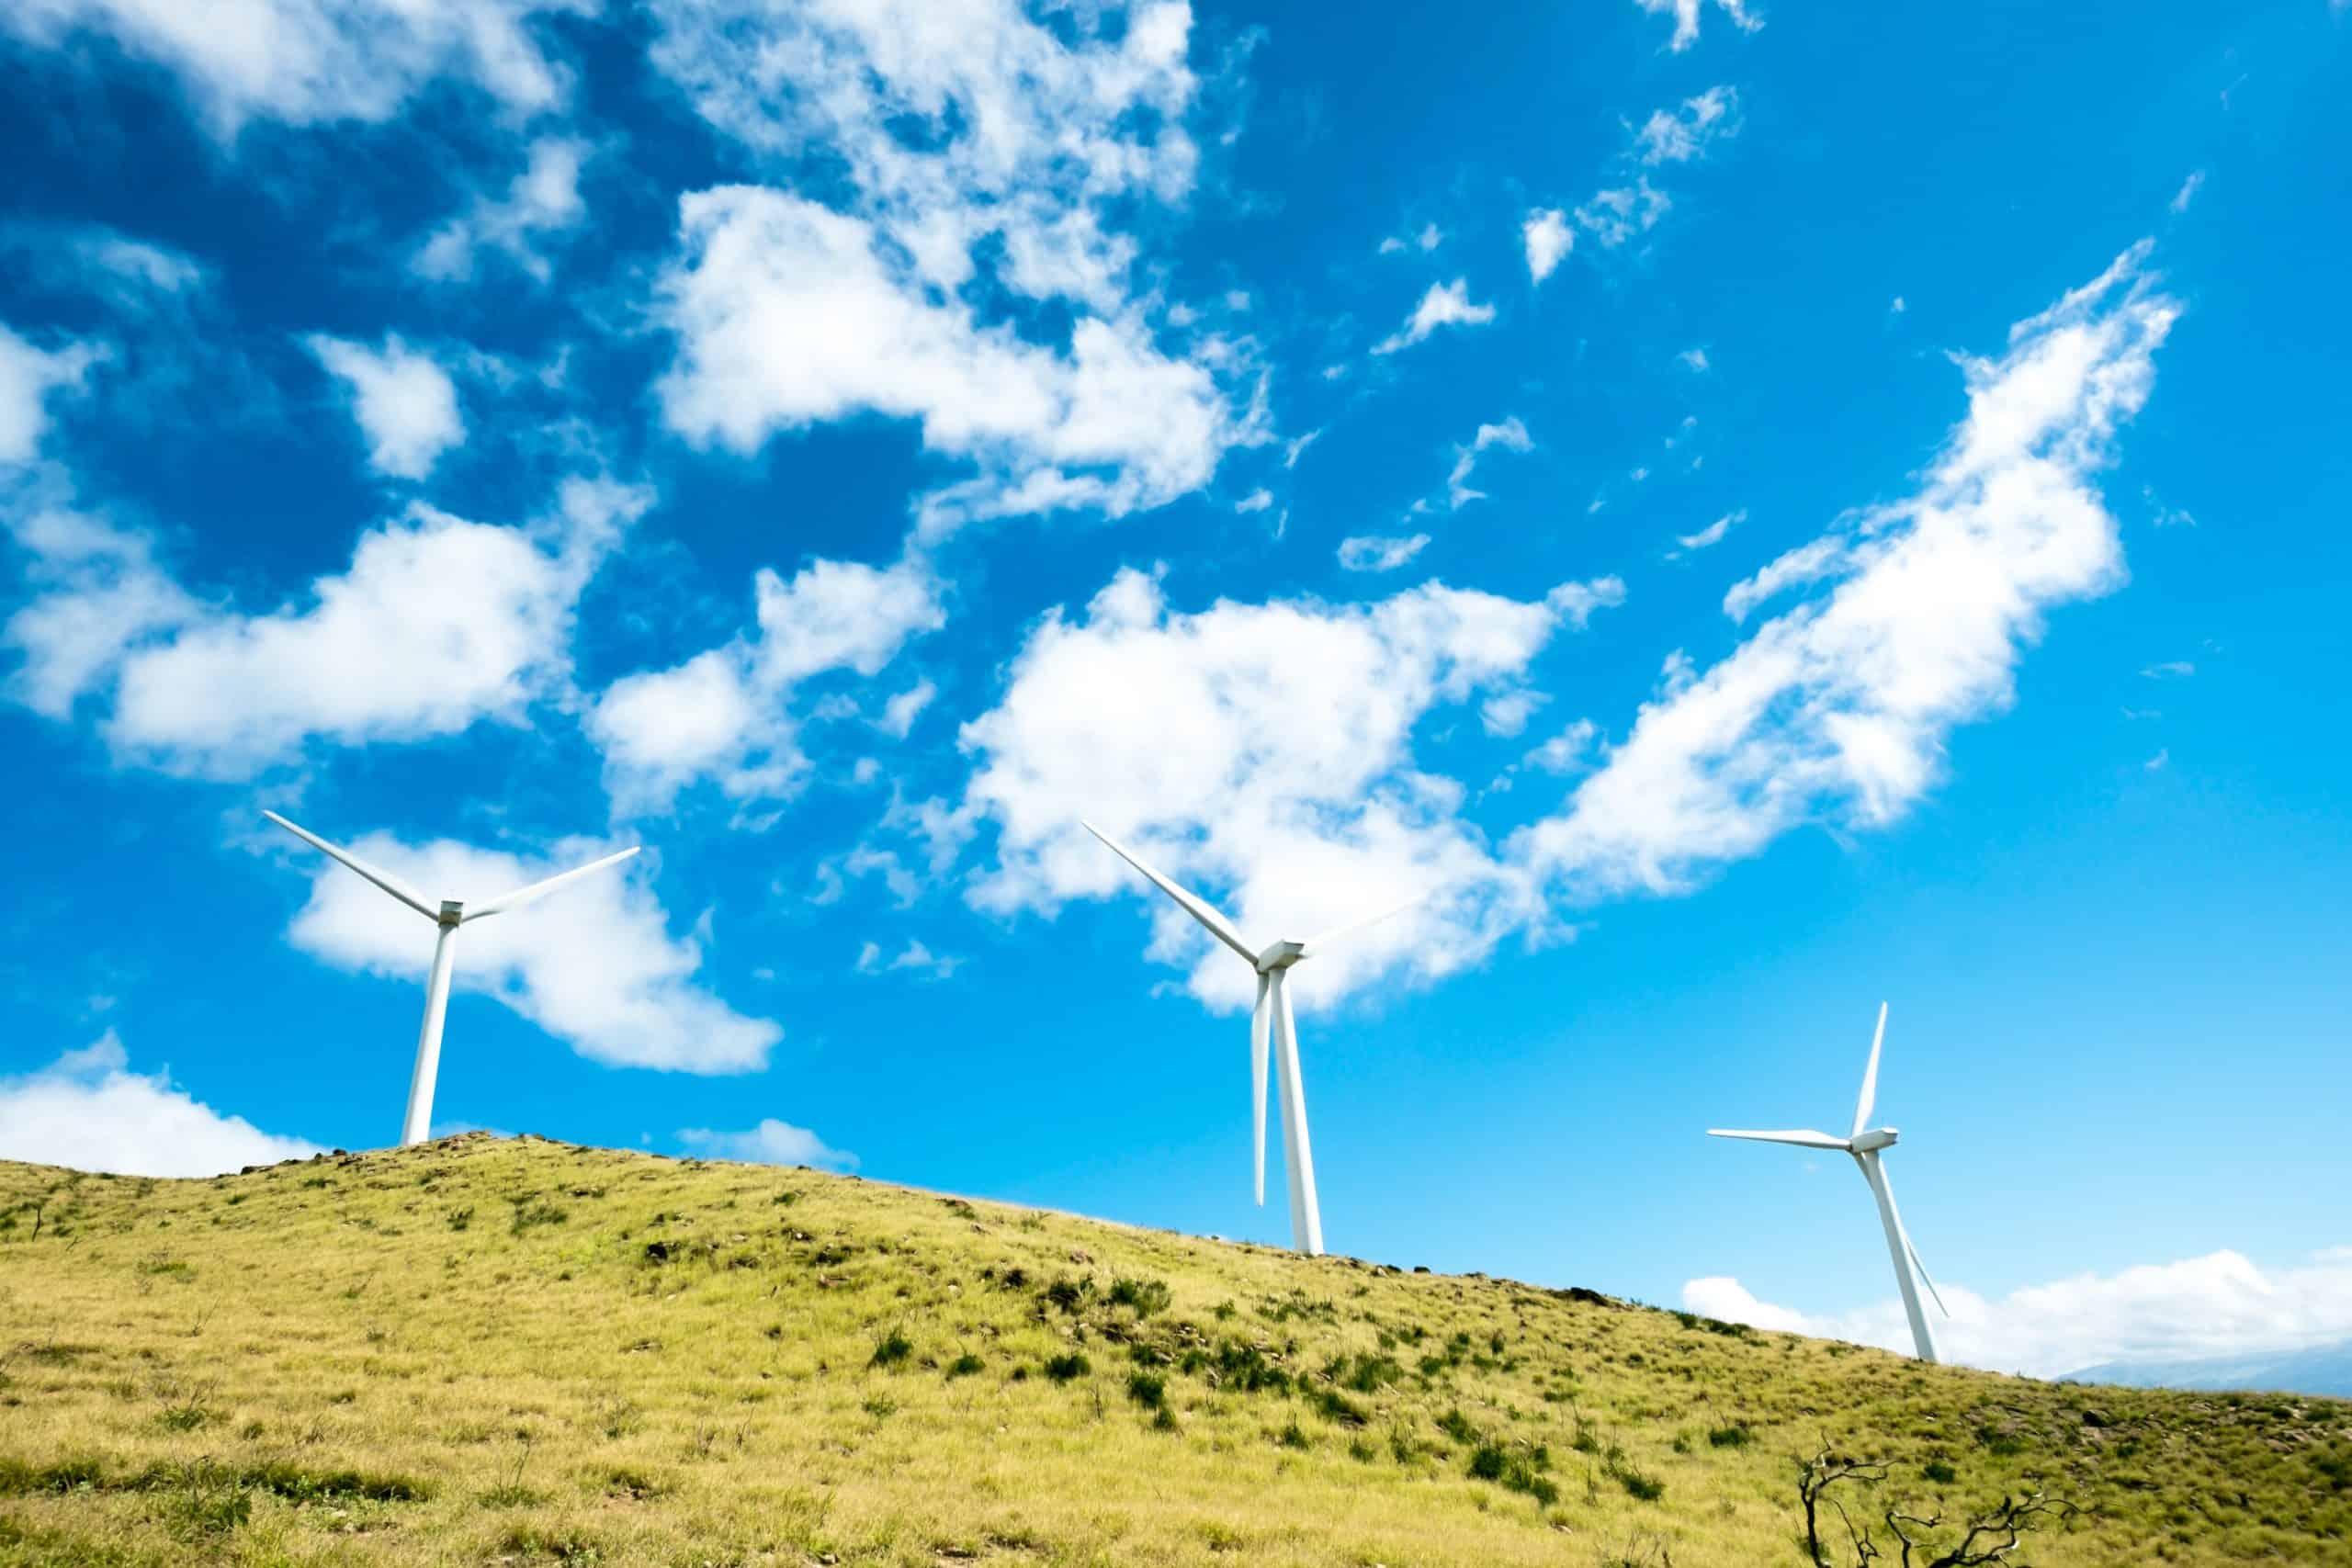 Three white windmills on top of a grassy hill with blue skies